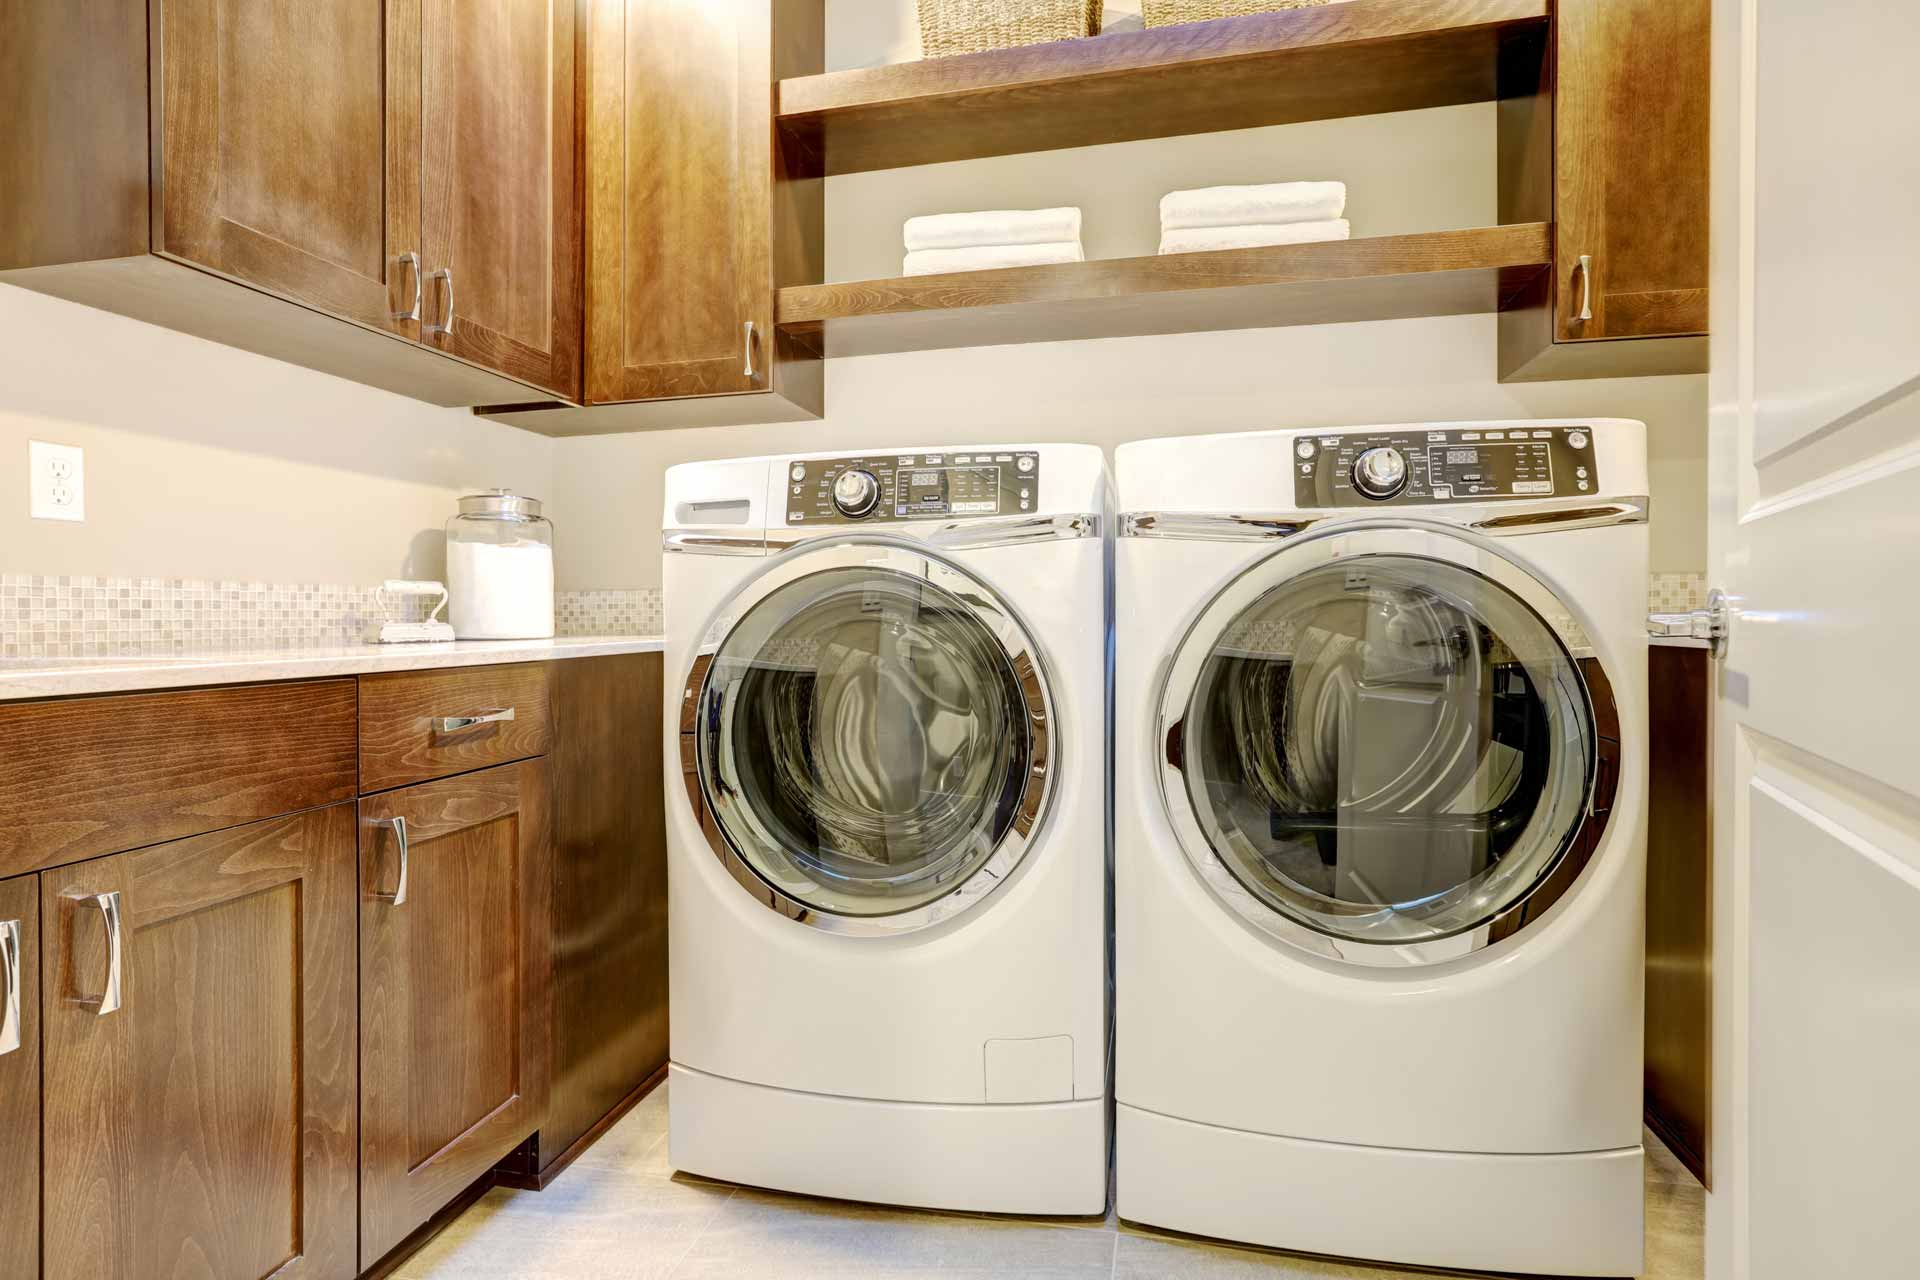 Clean, well-organized laundry room